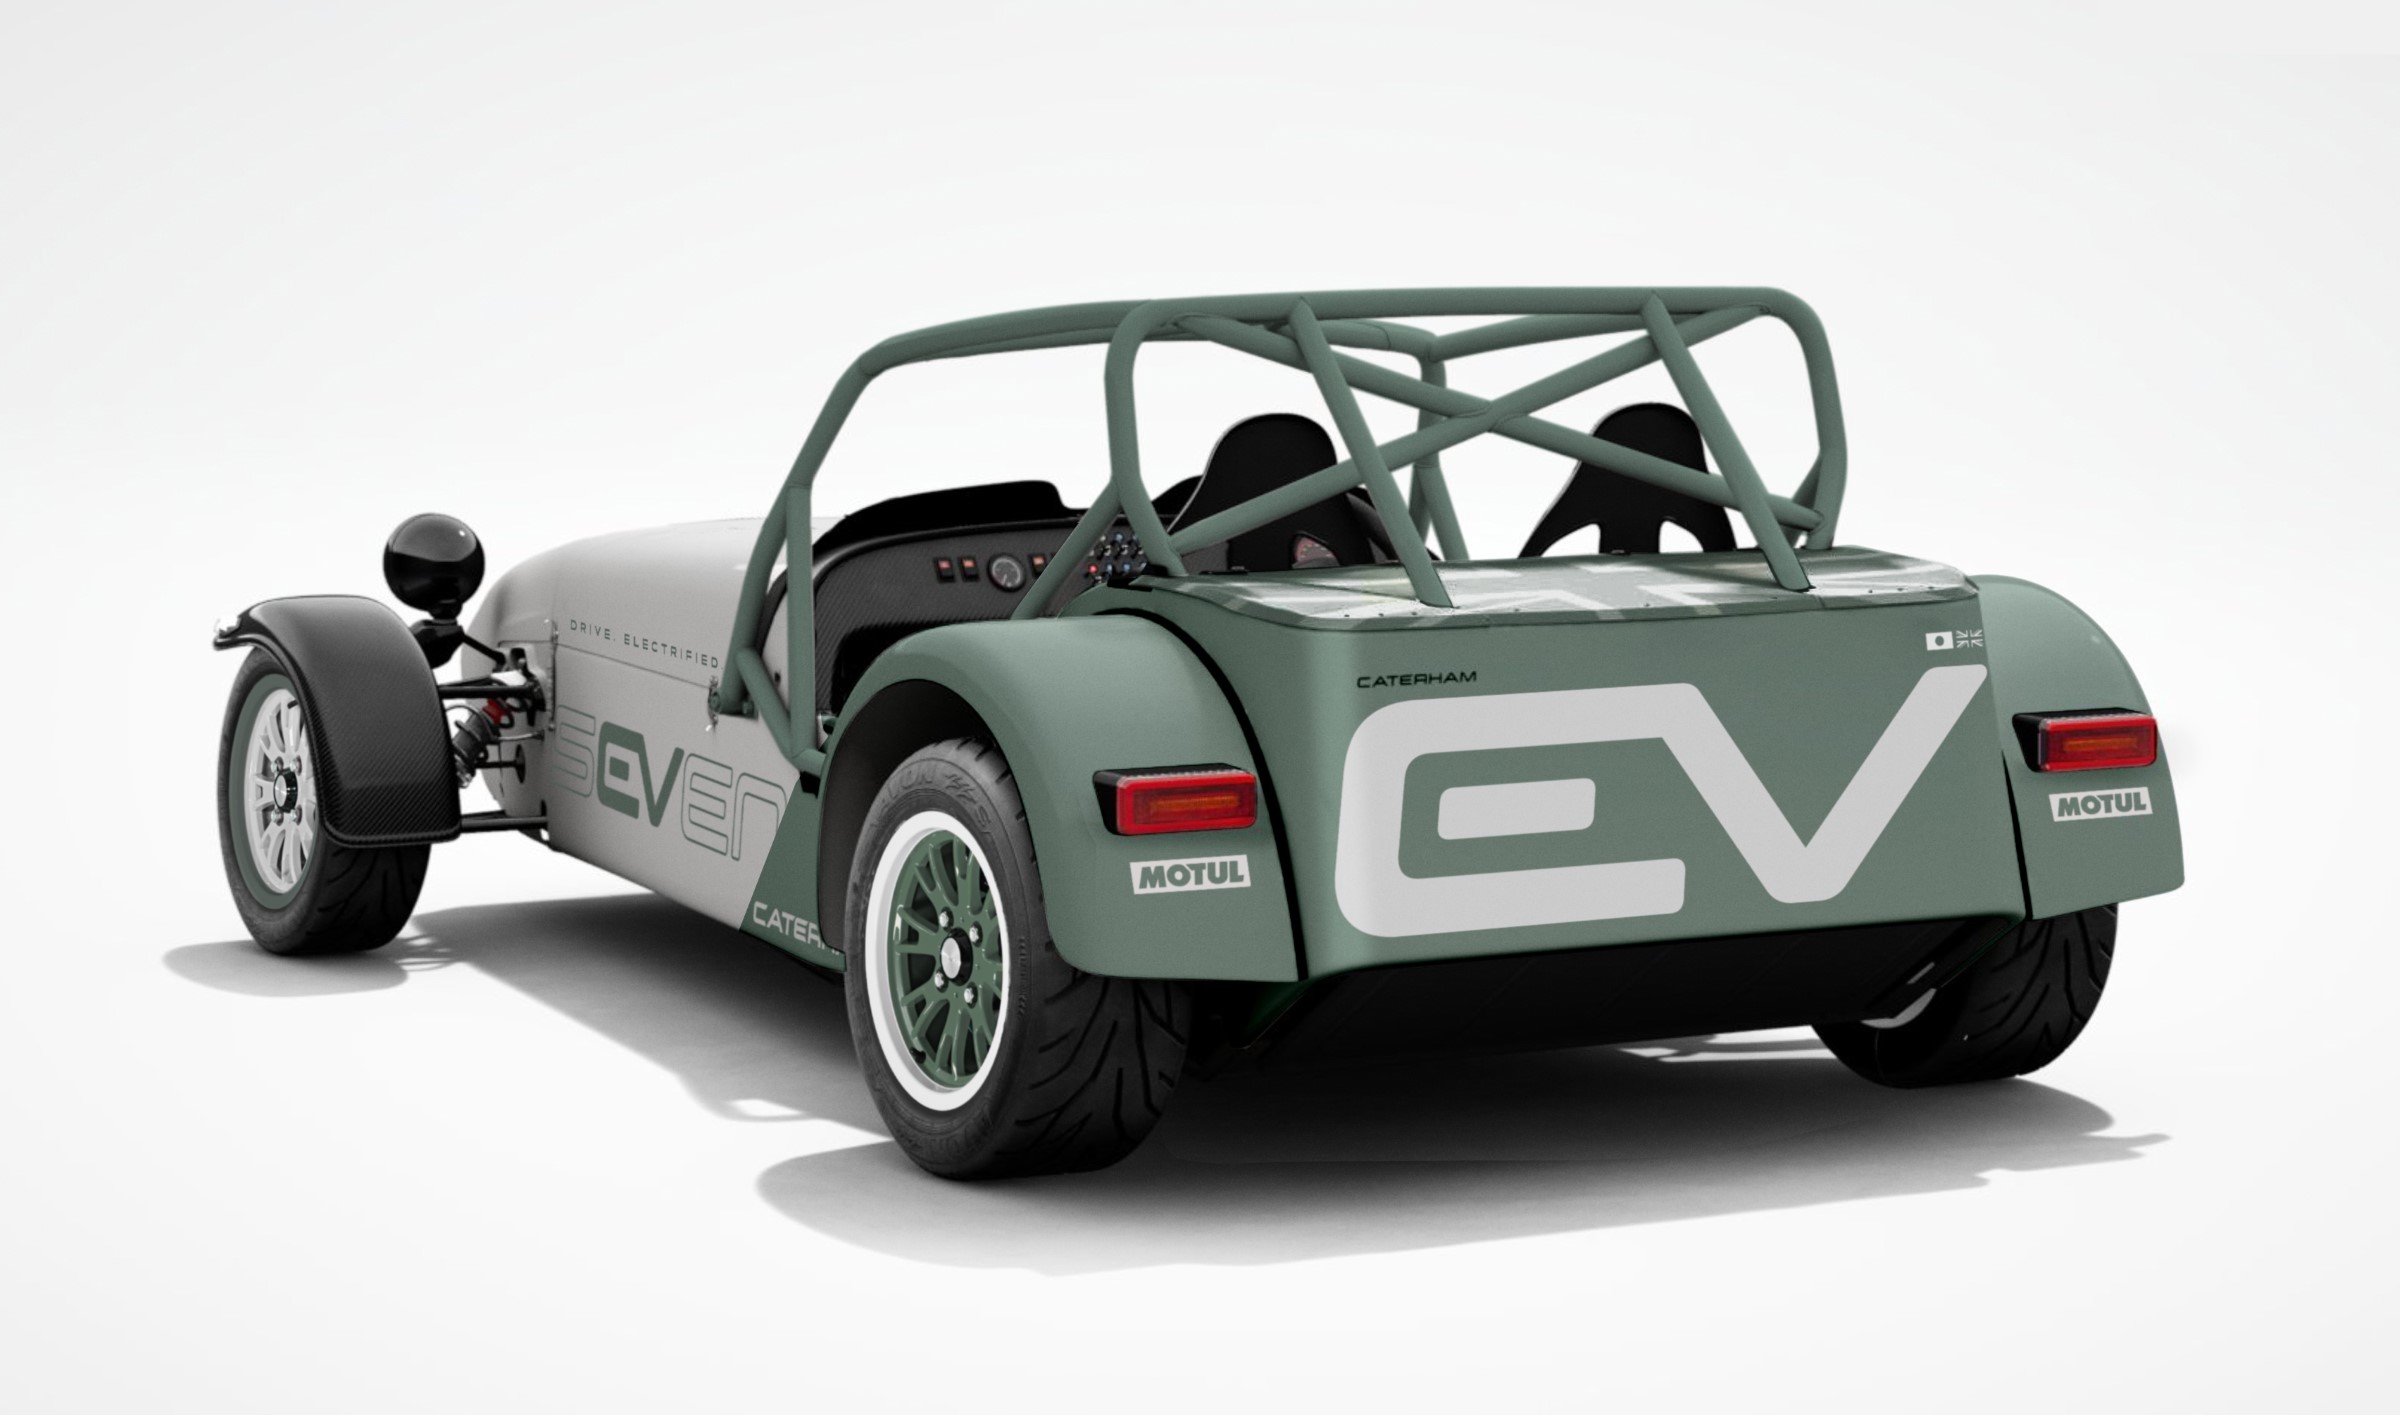 Electric Caterham is a glimpse into the future of track days